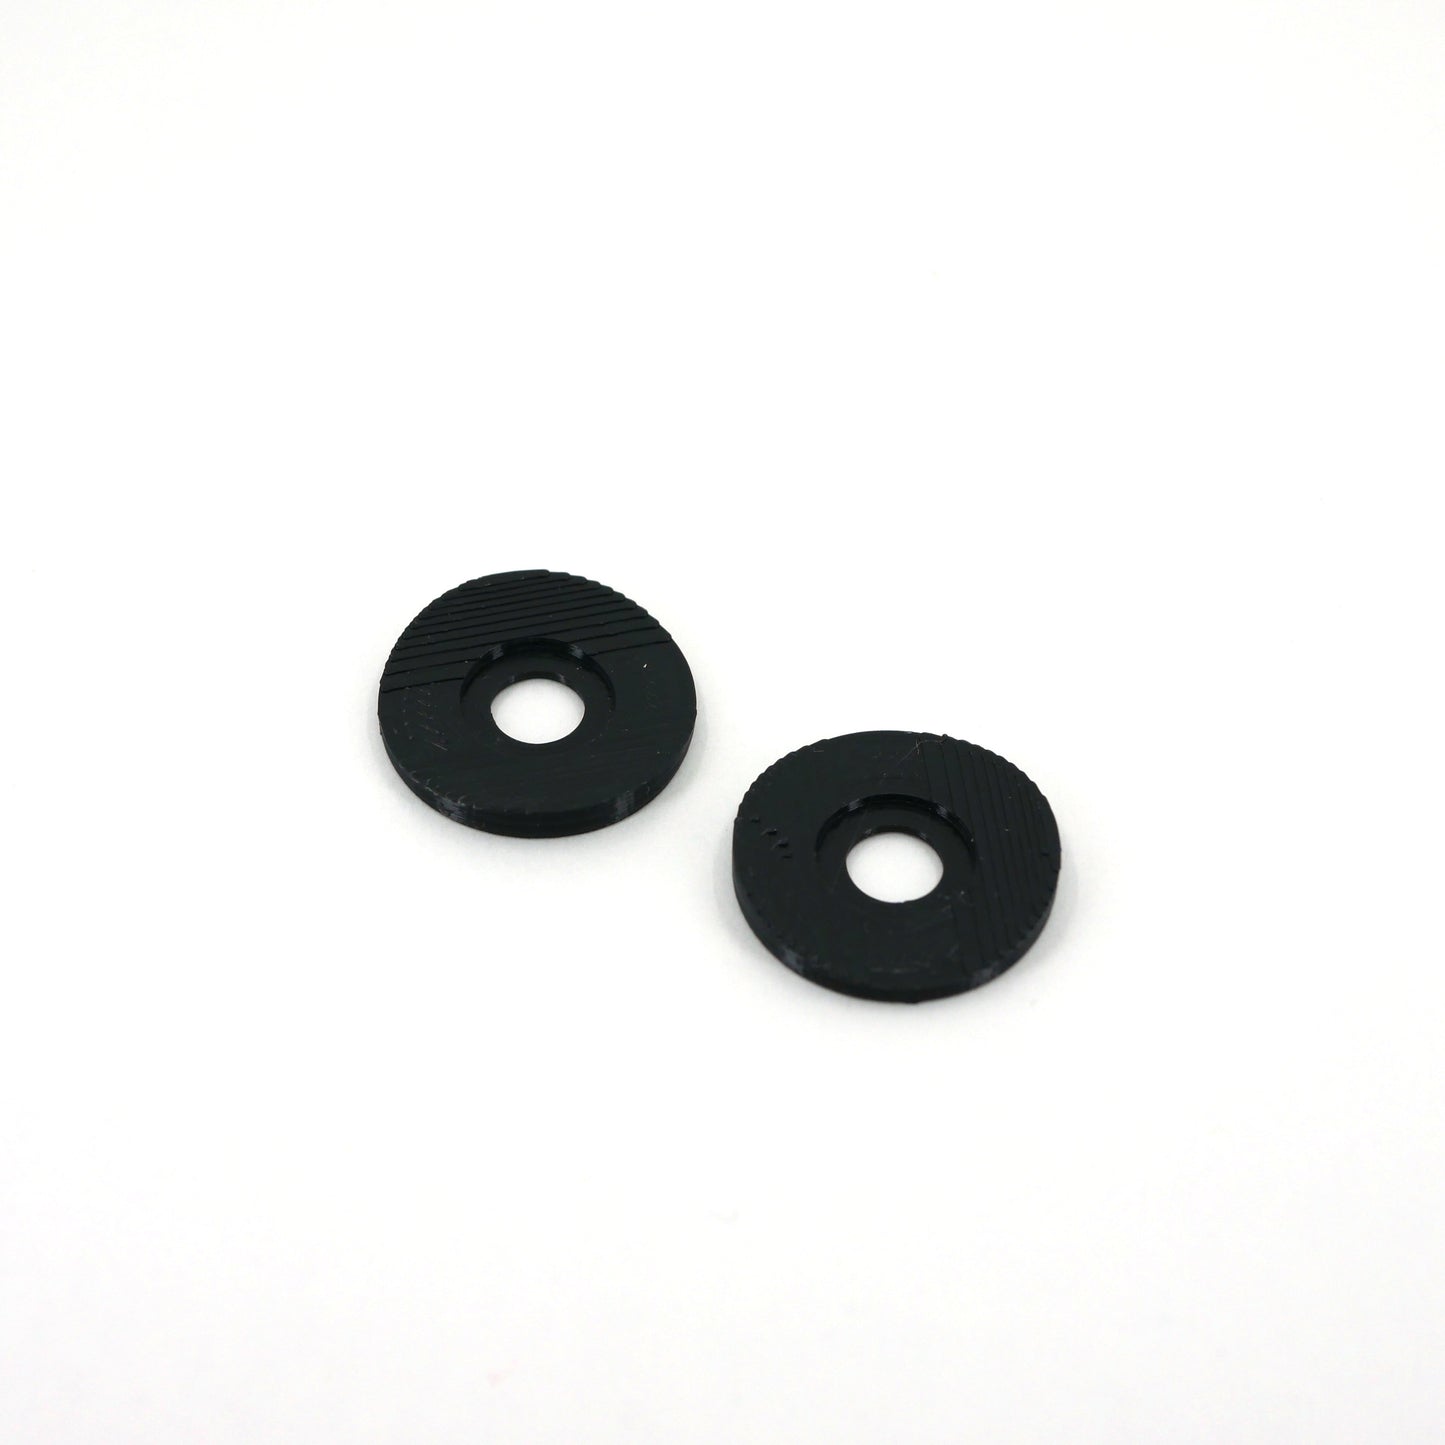 Two black microphone washers for the Blue Yeti microphone sitting at an angle.